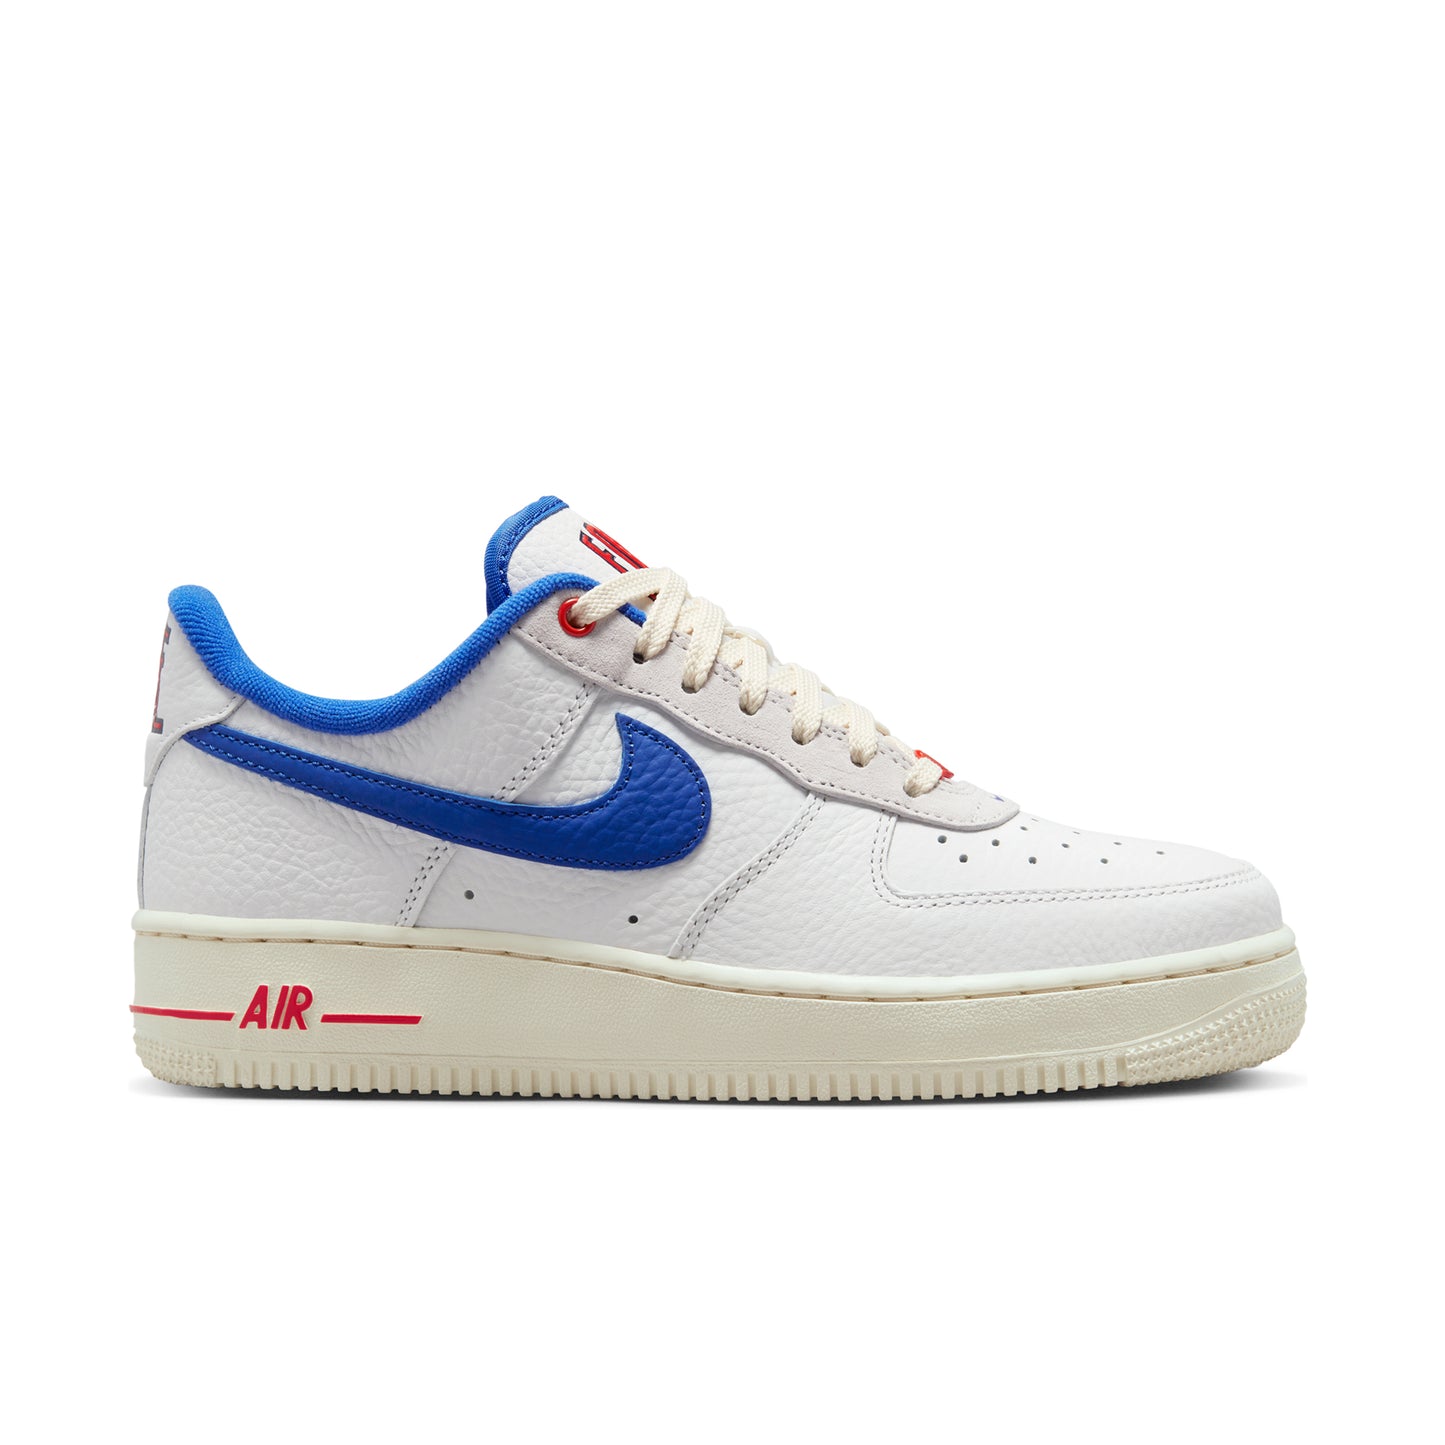 Nike Air Force 1 Low '07 LX Command Force University Blue Summit White W